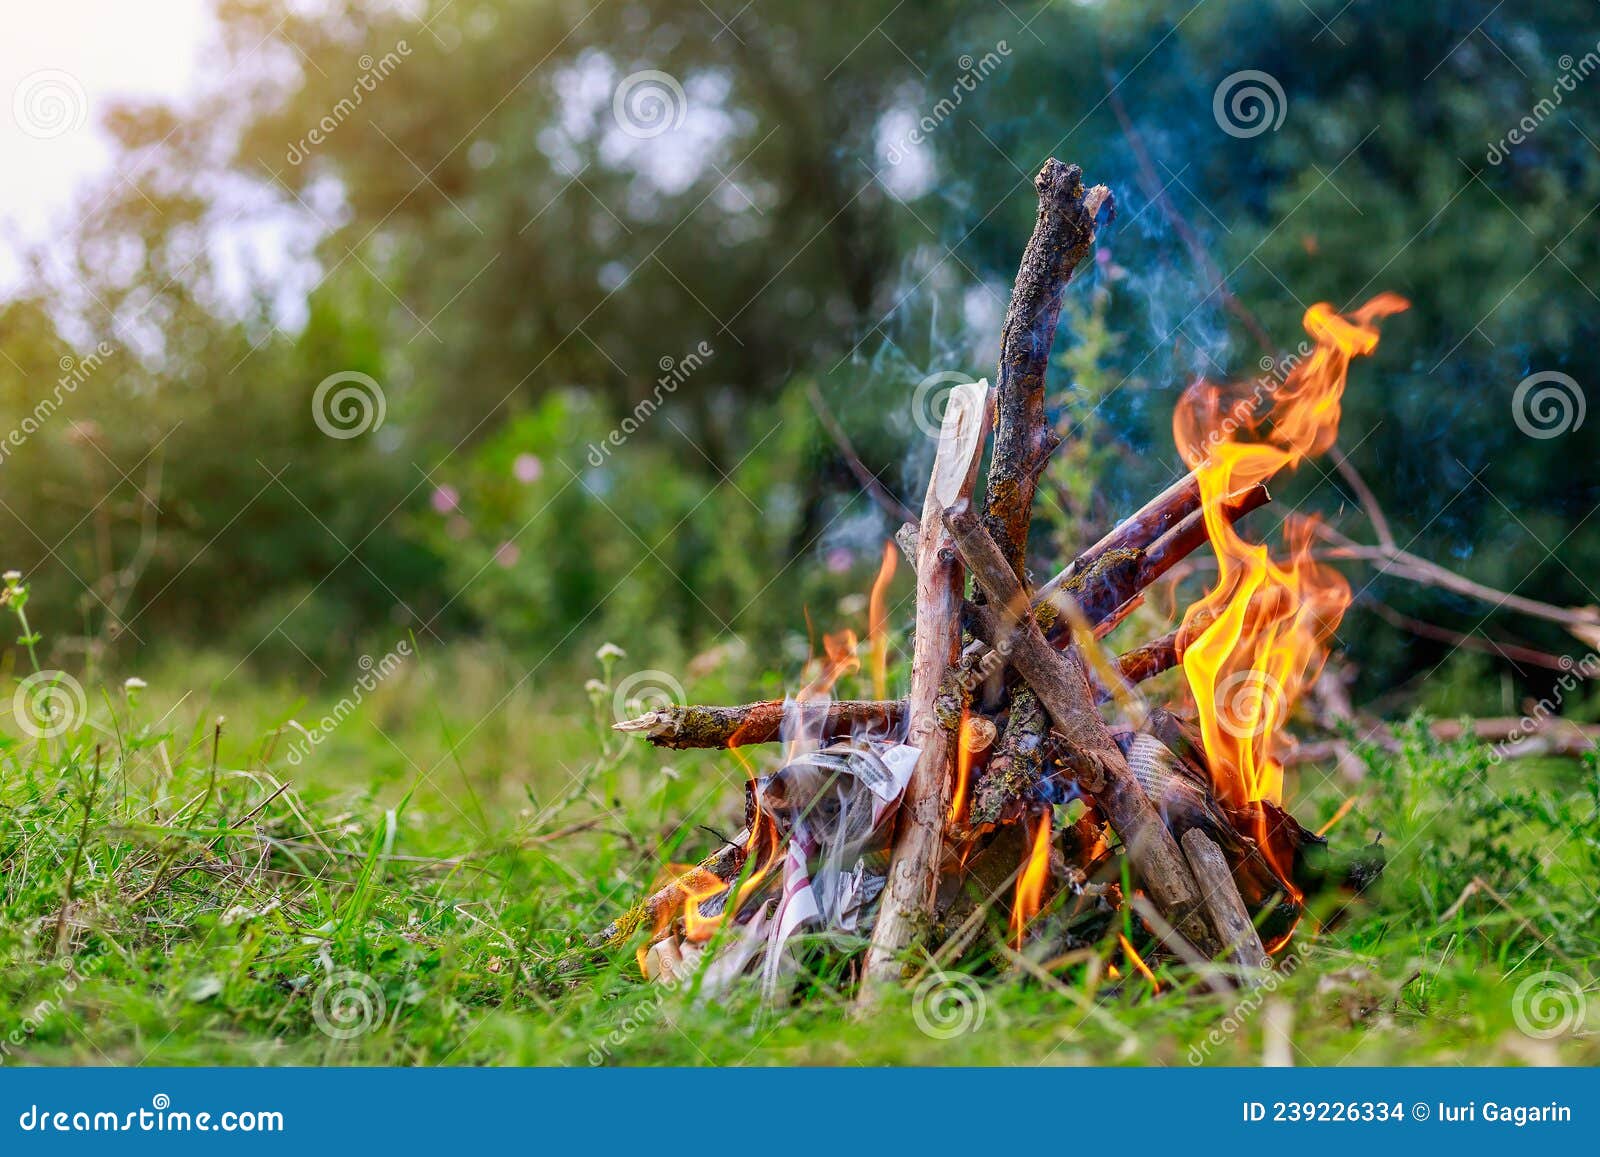 Fire or Bonfire in Nature in a Tourist Camp on a Camping Trip ...